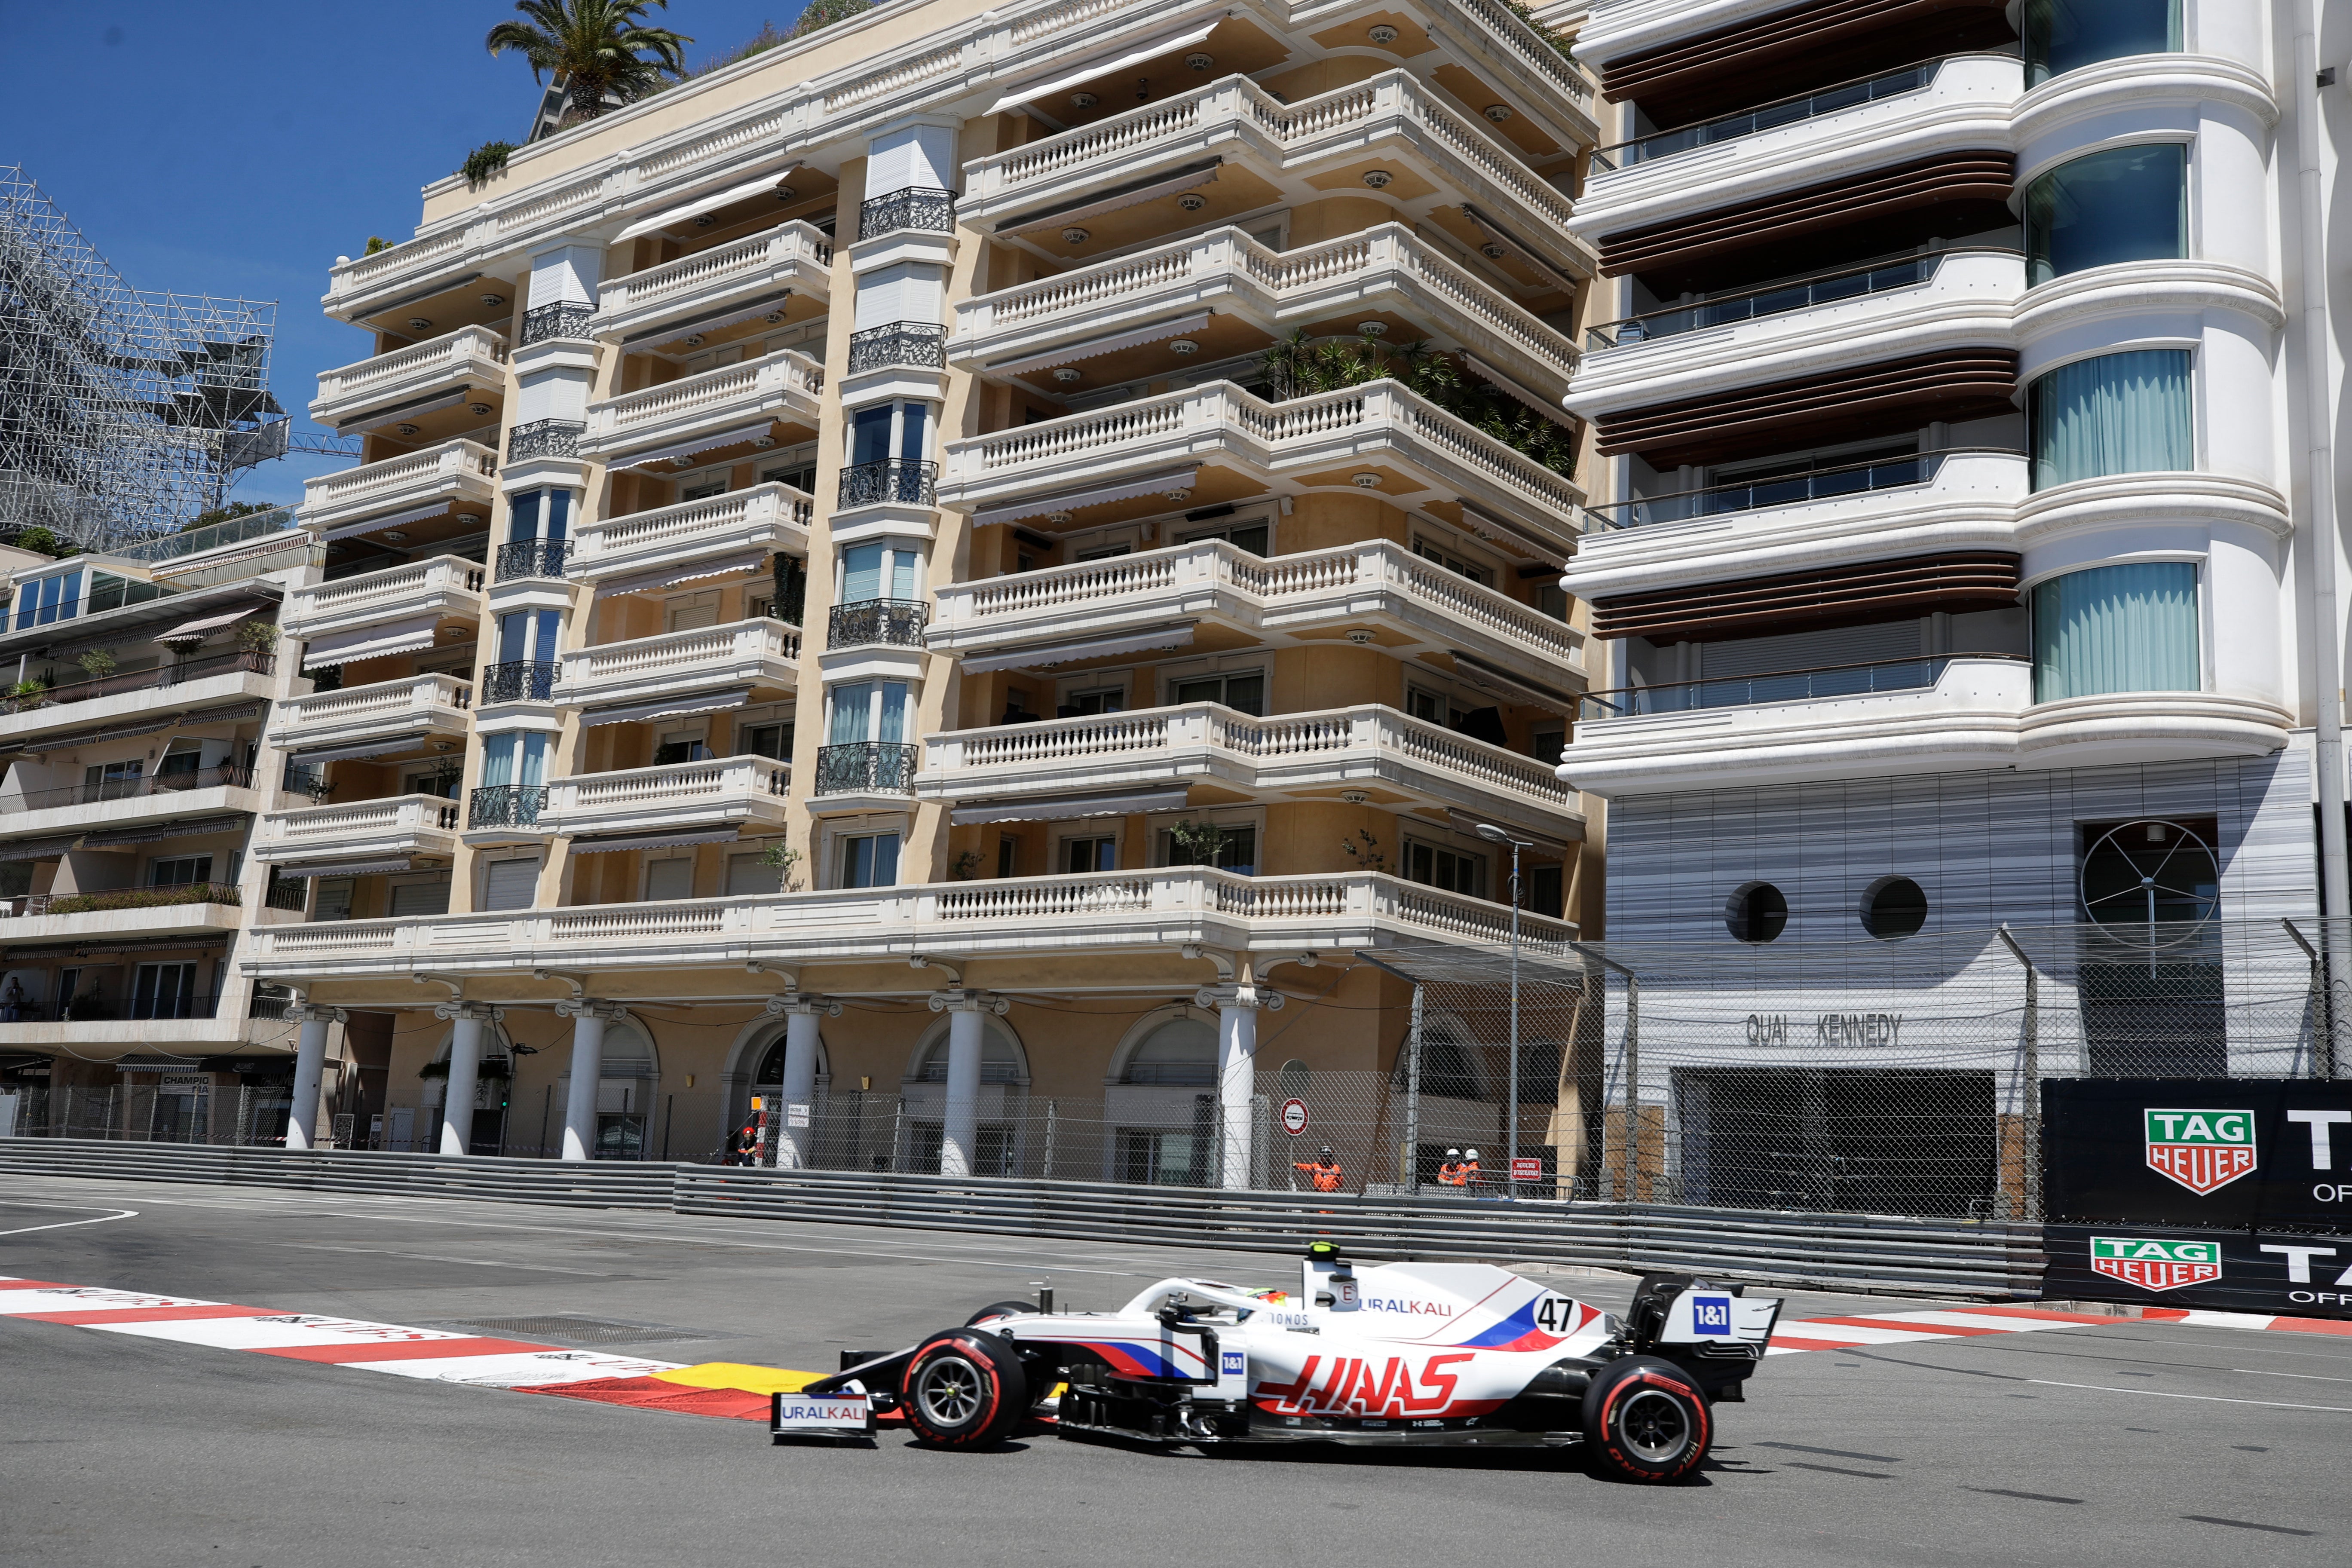 Mick Schumacher crashed out of final practice in Monaco